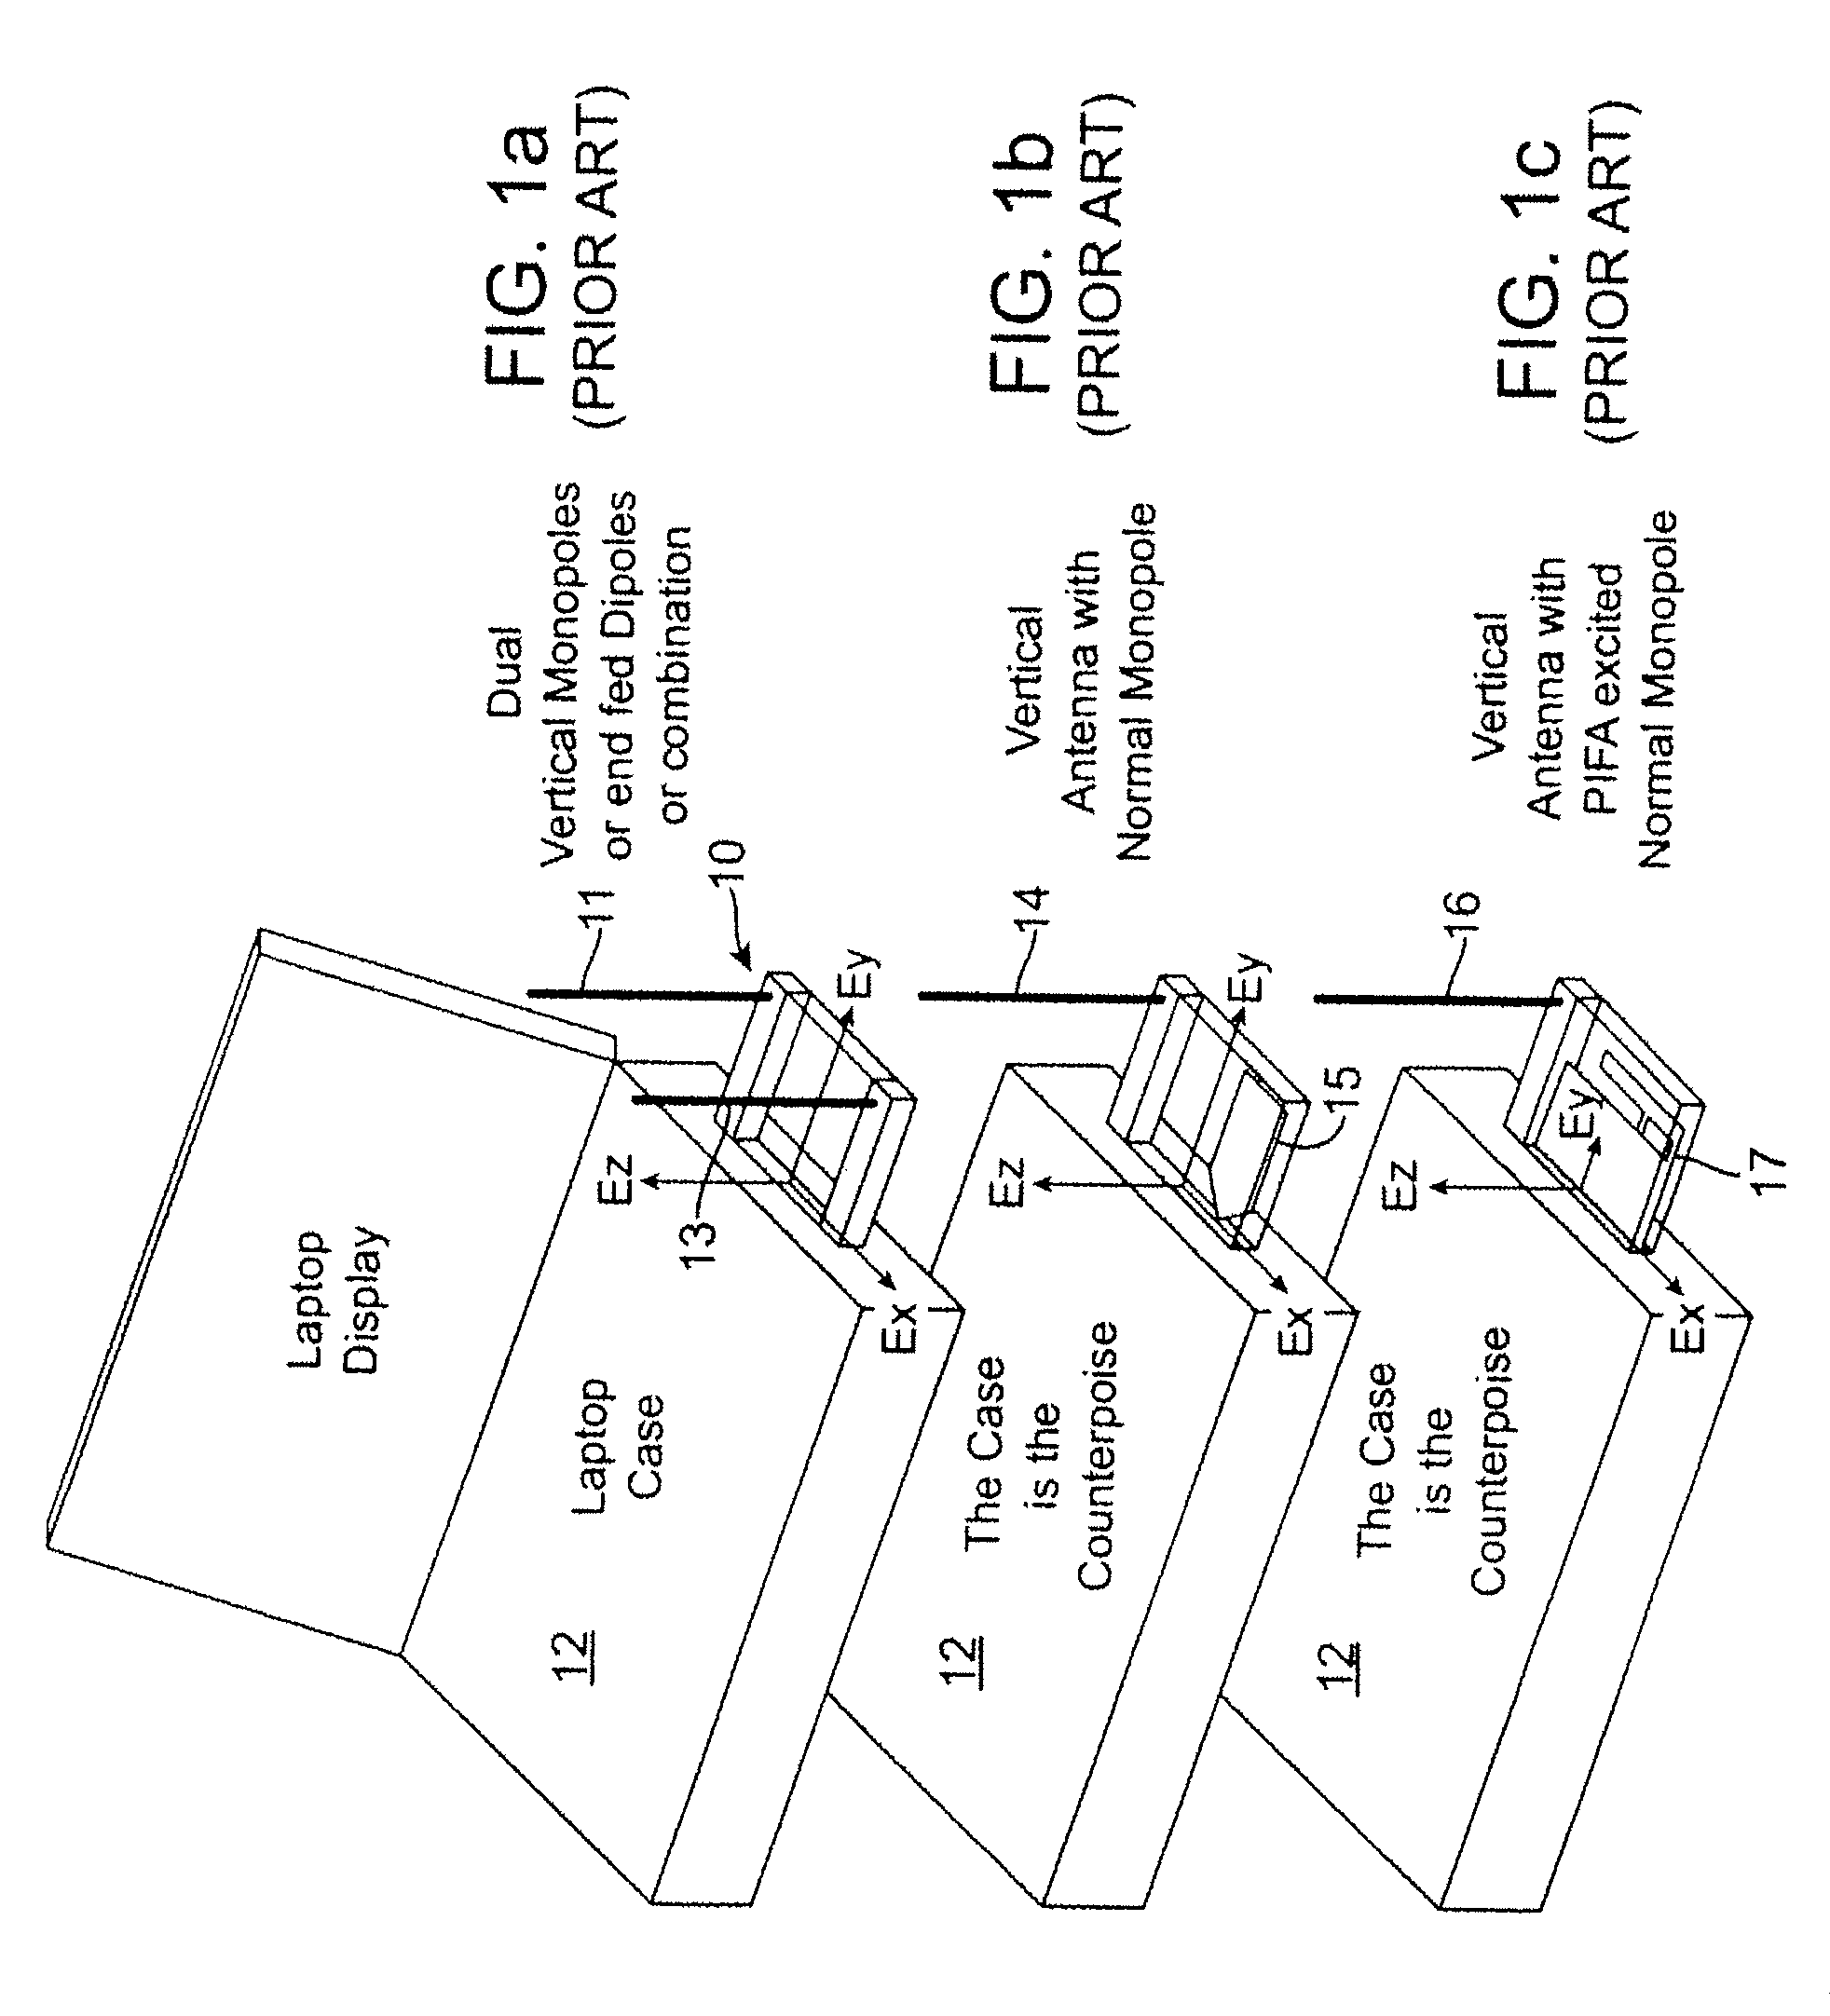 Antenna Configurations for Compact Device Wireless Communication